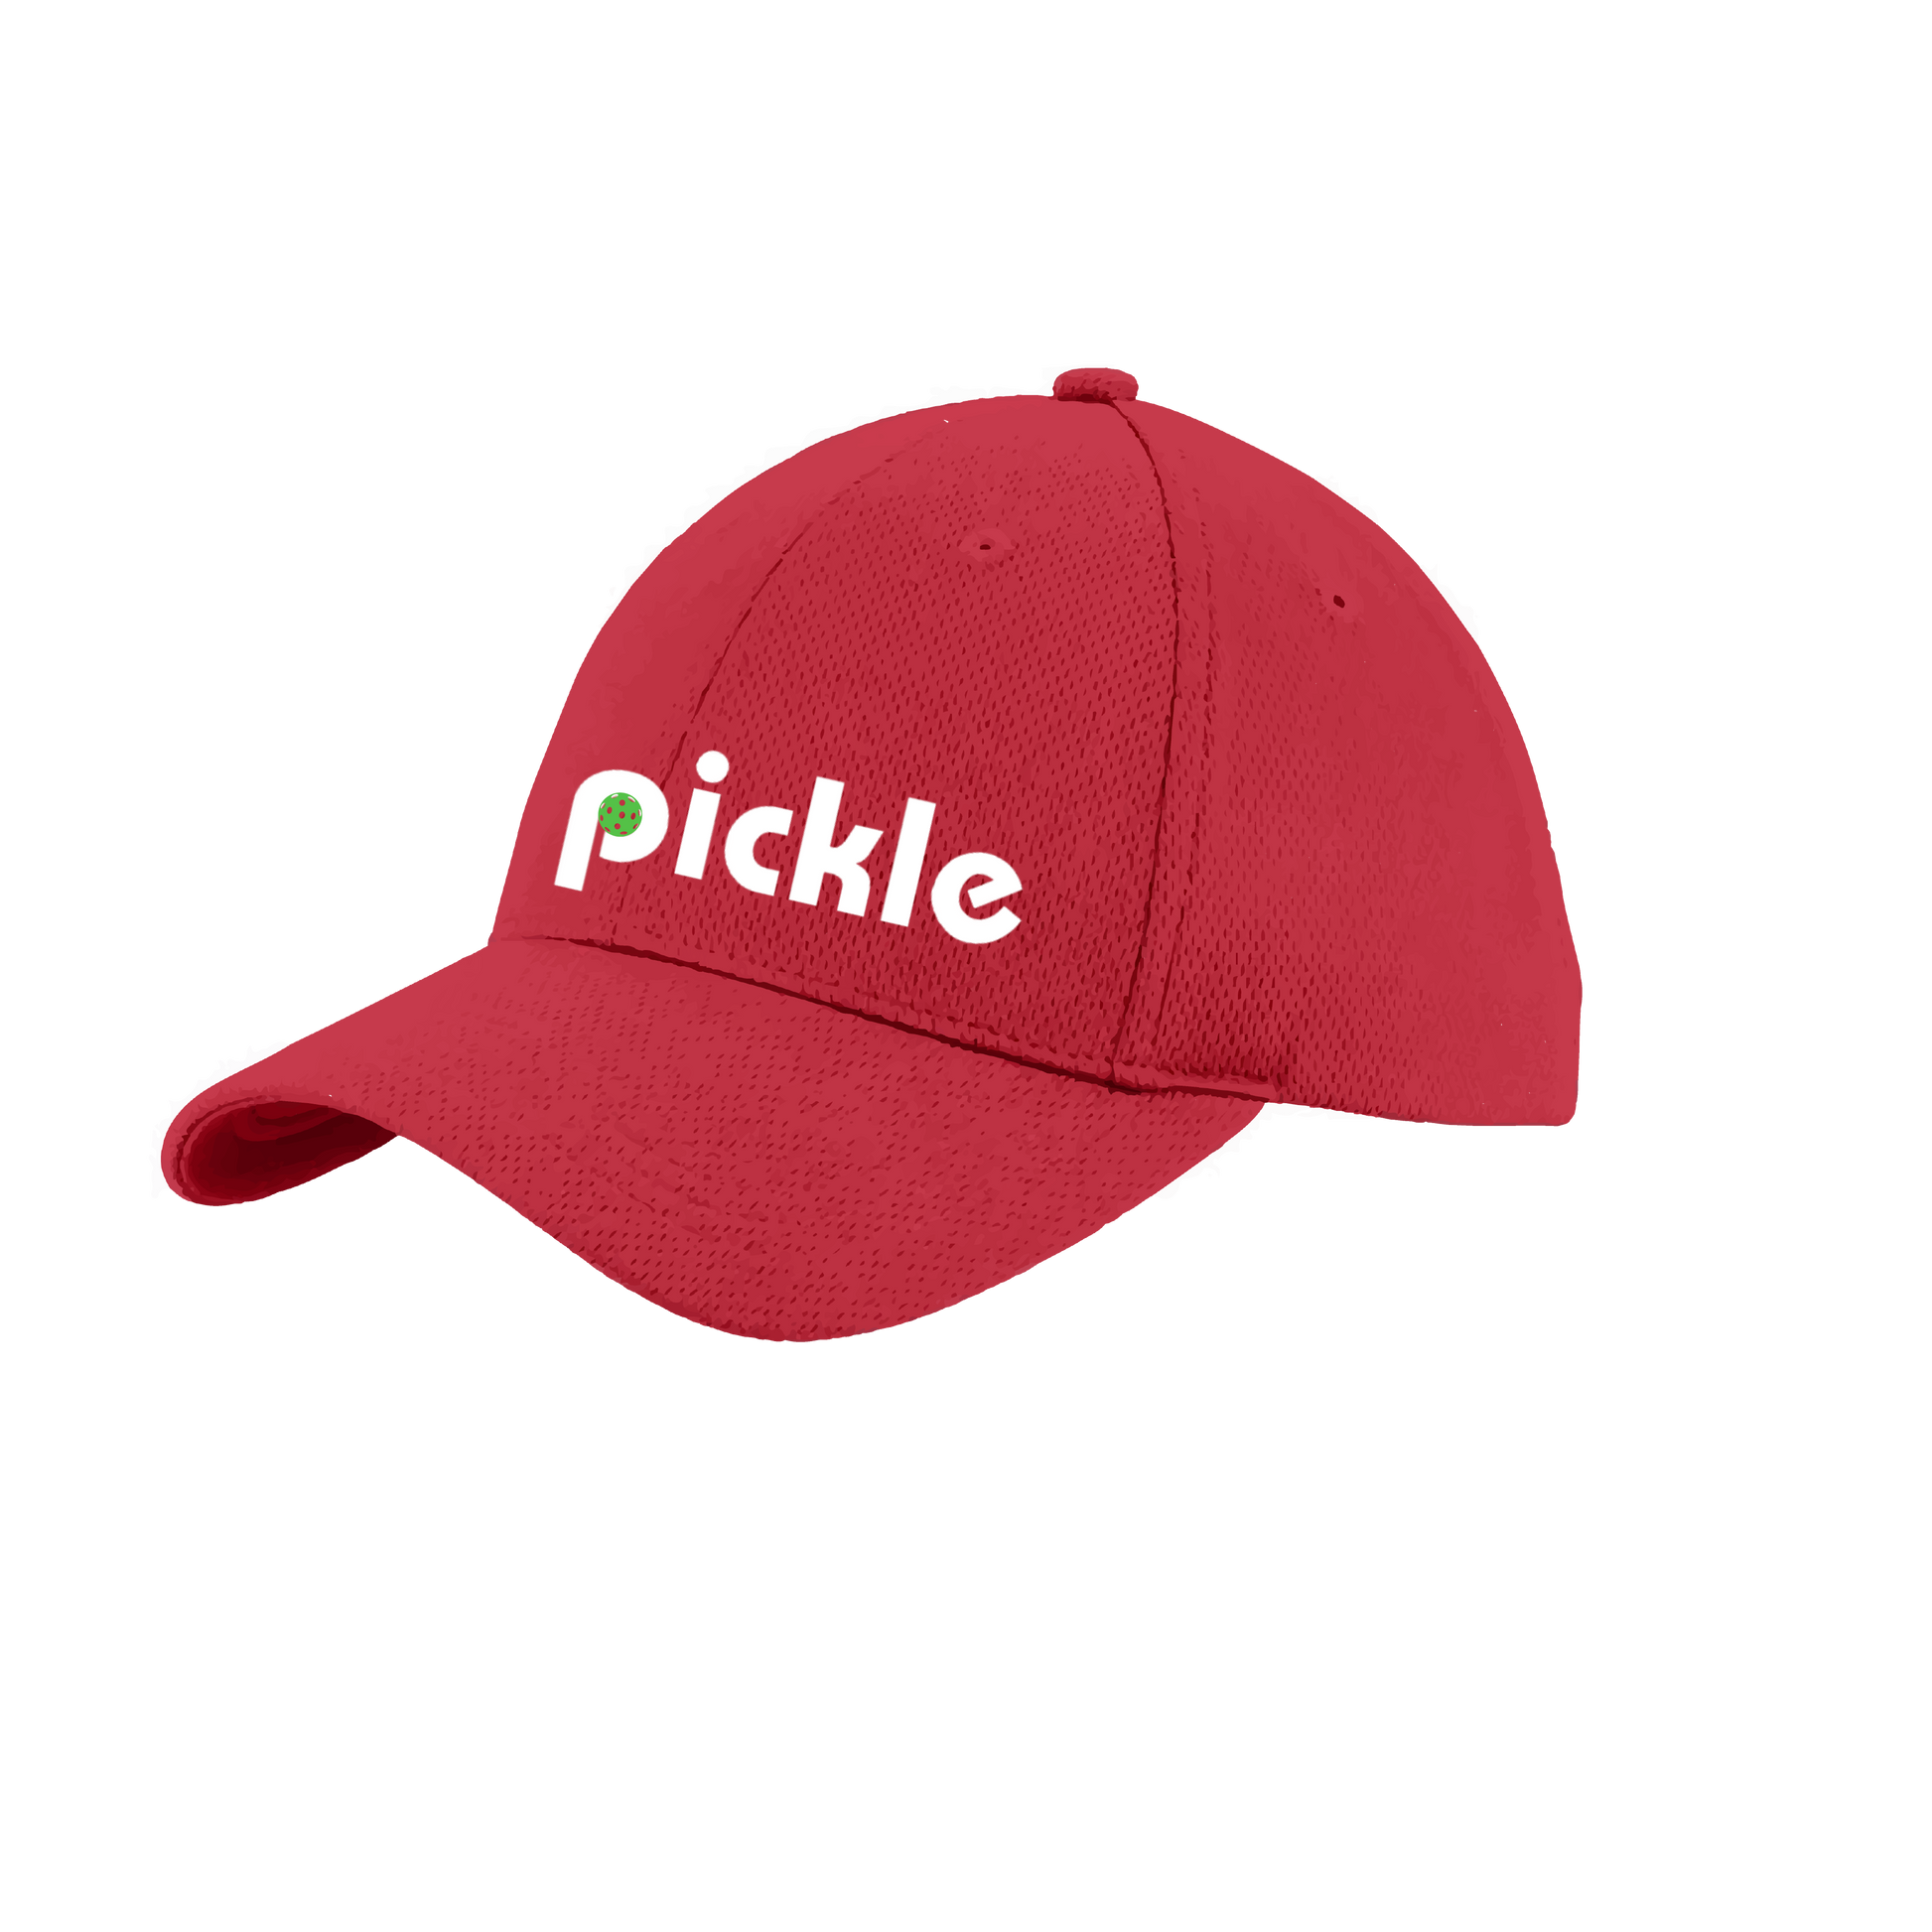 This high-performance pickleball hat is designed to keep the focus on the game and not the sun. Crafted with 100% polyester with closed-hole mesh and PosiCharge Technology, it has a hock and loop closure that ensures a perfect fit for every adult. Look great and stay cool with this functional hat.